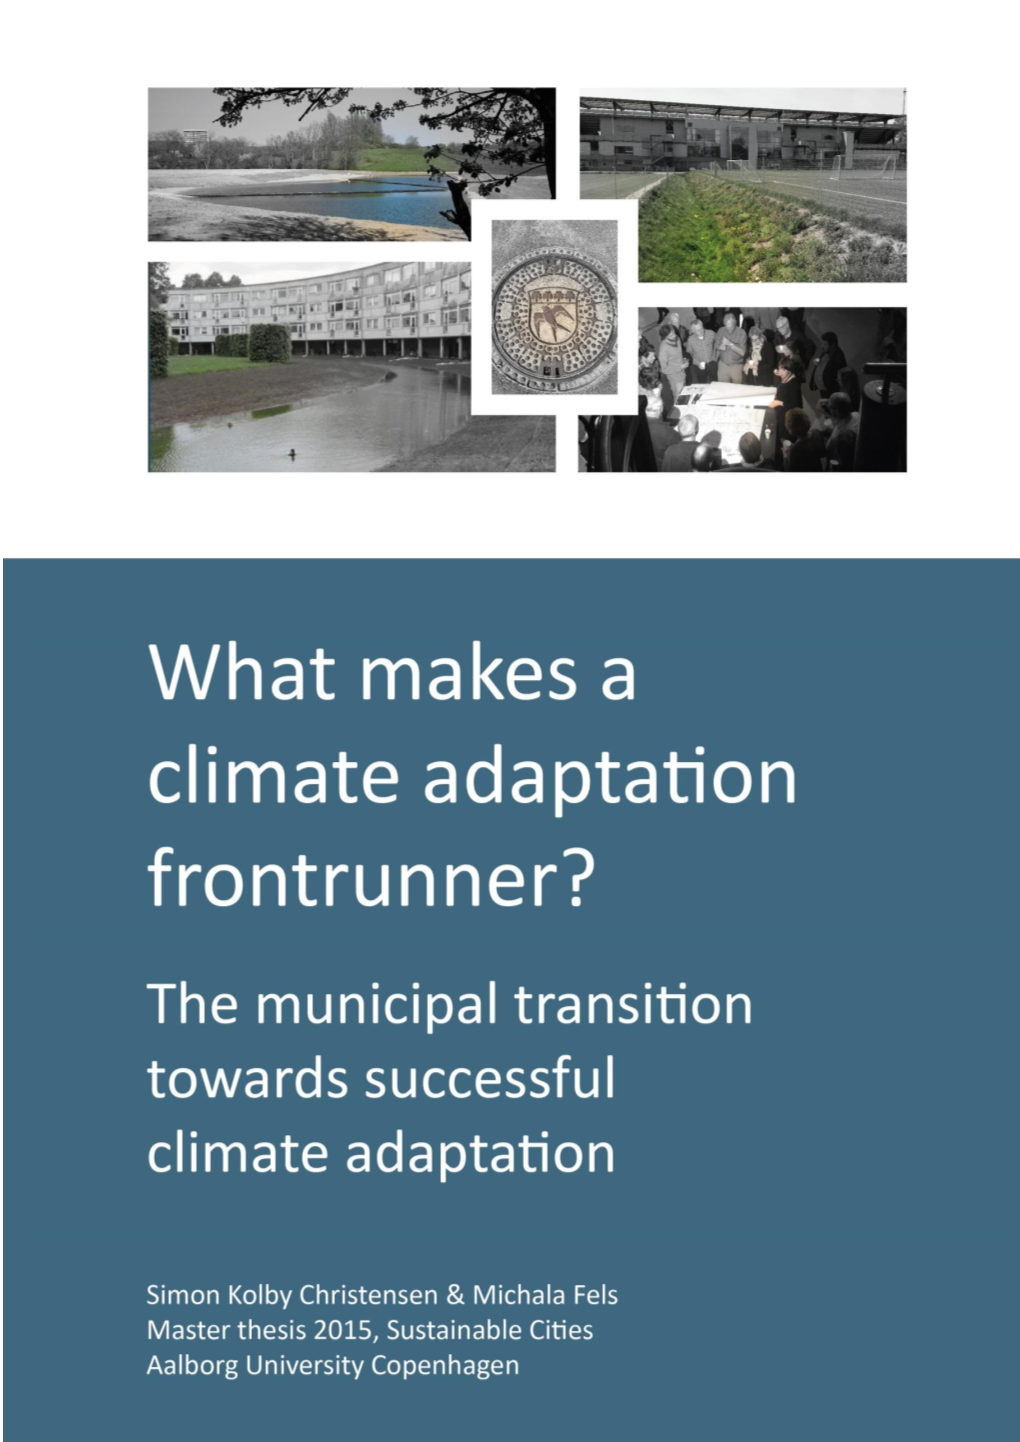 What Makes a Climate Adaptation Frontrunner?